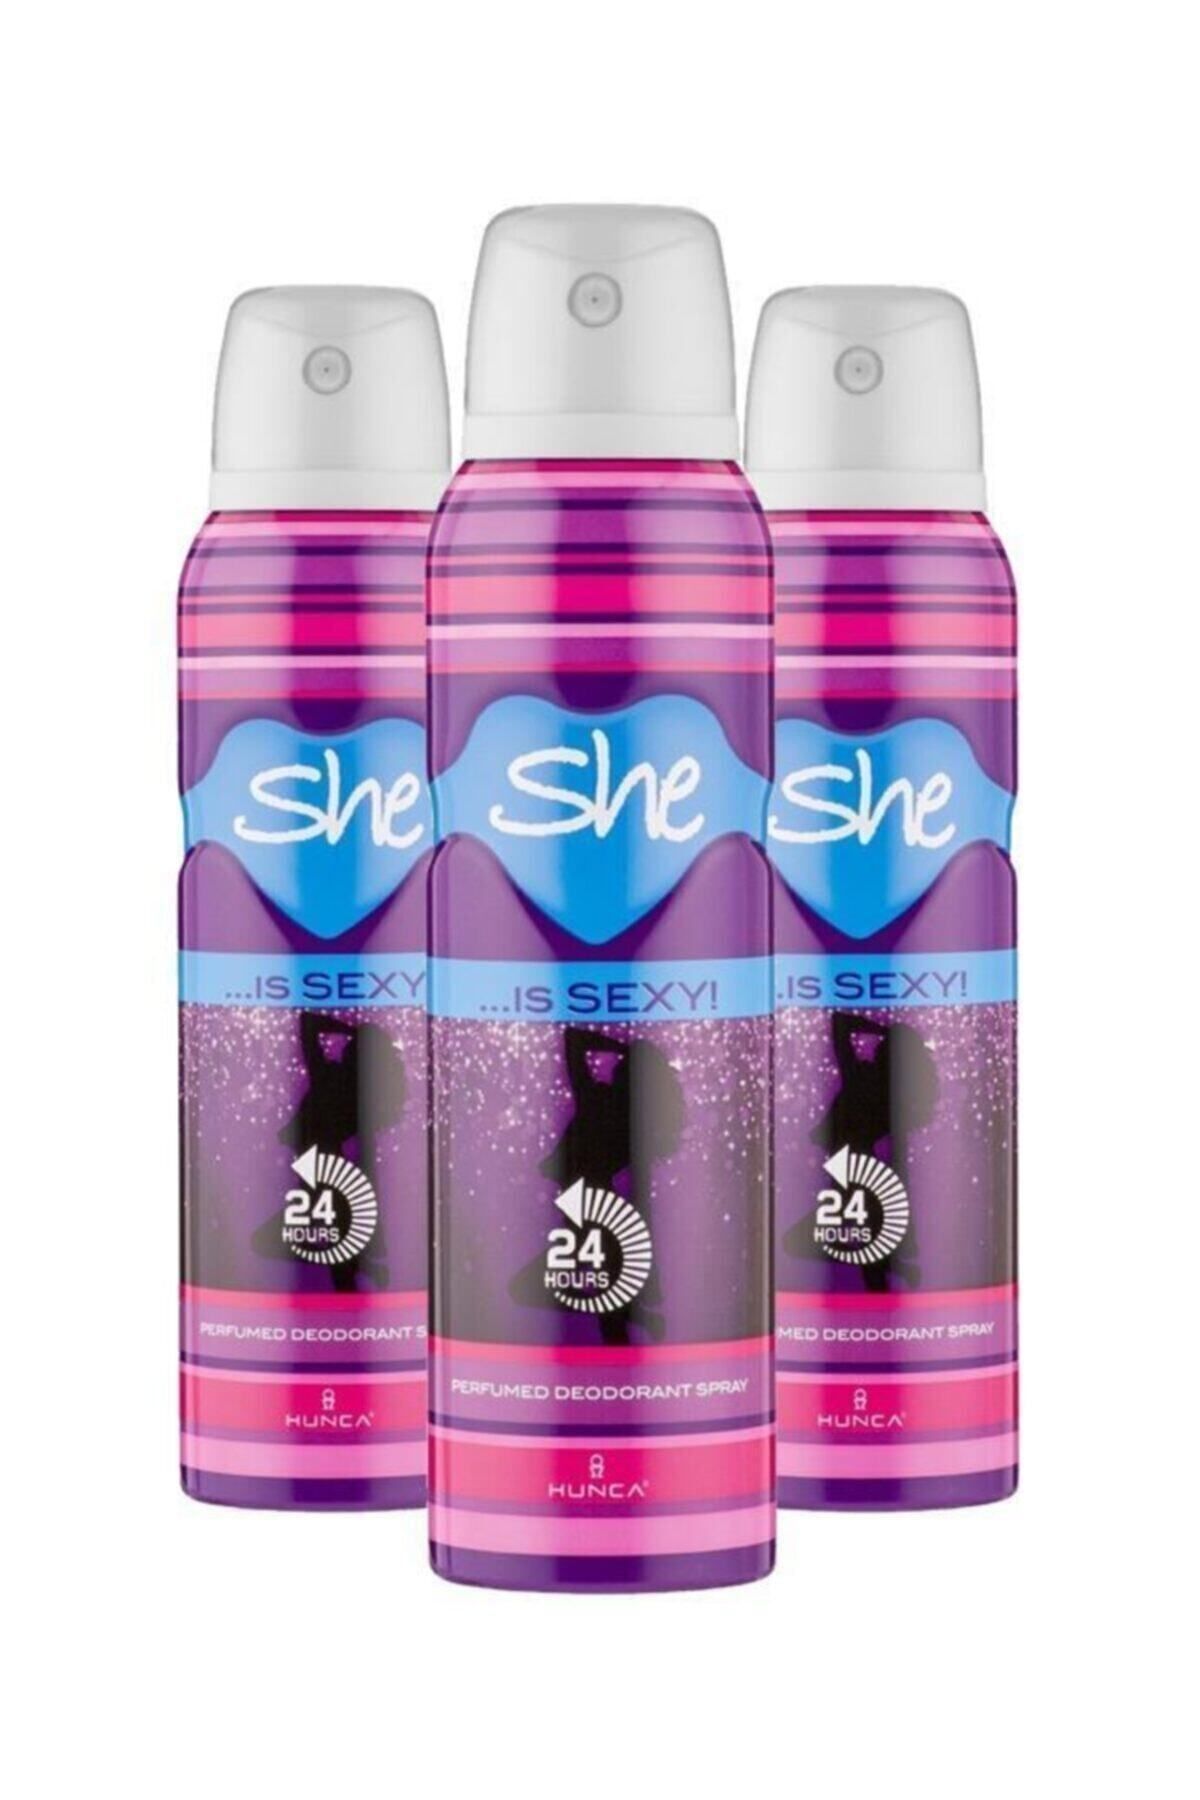 She Deodorant For Women Is Sexy 150ml X 3 Adet